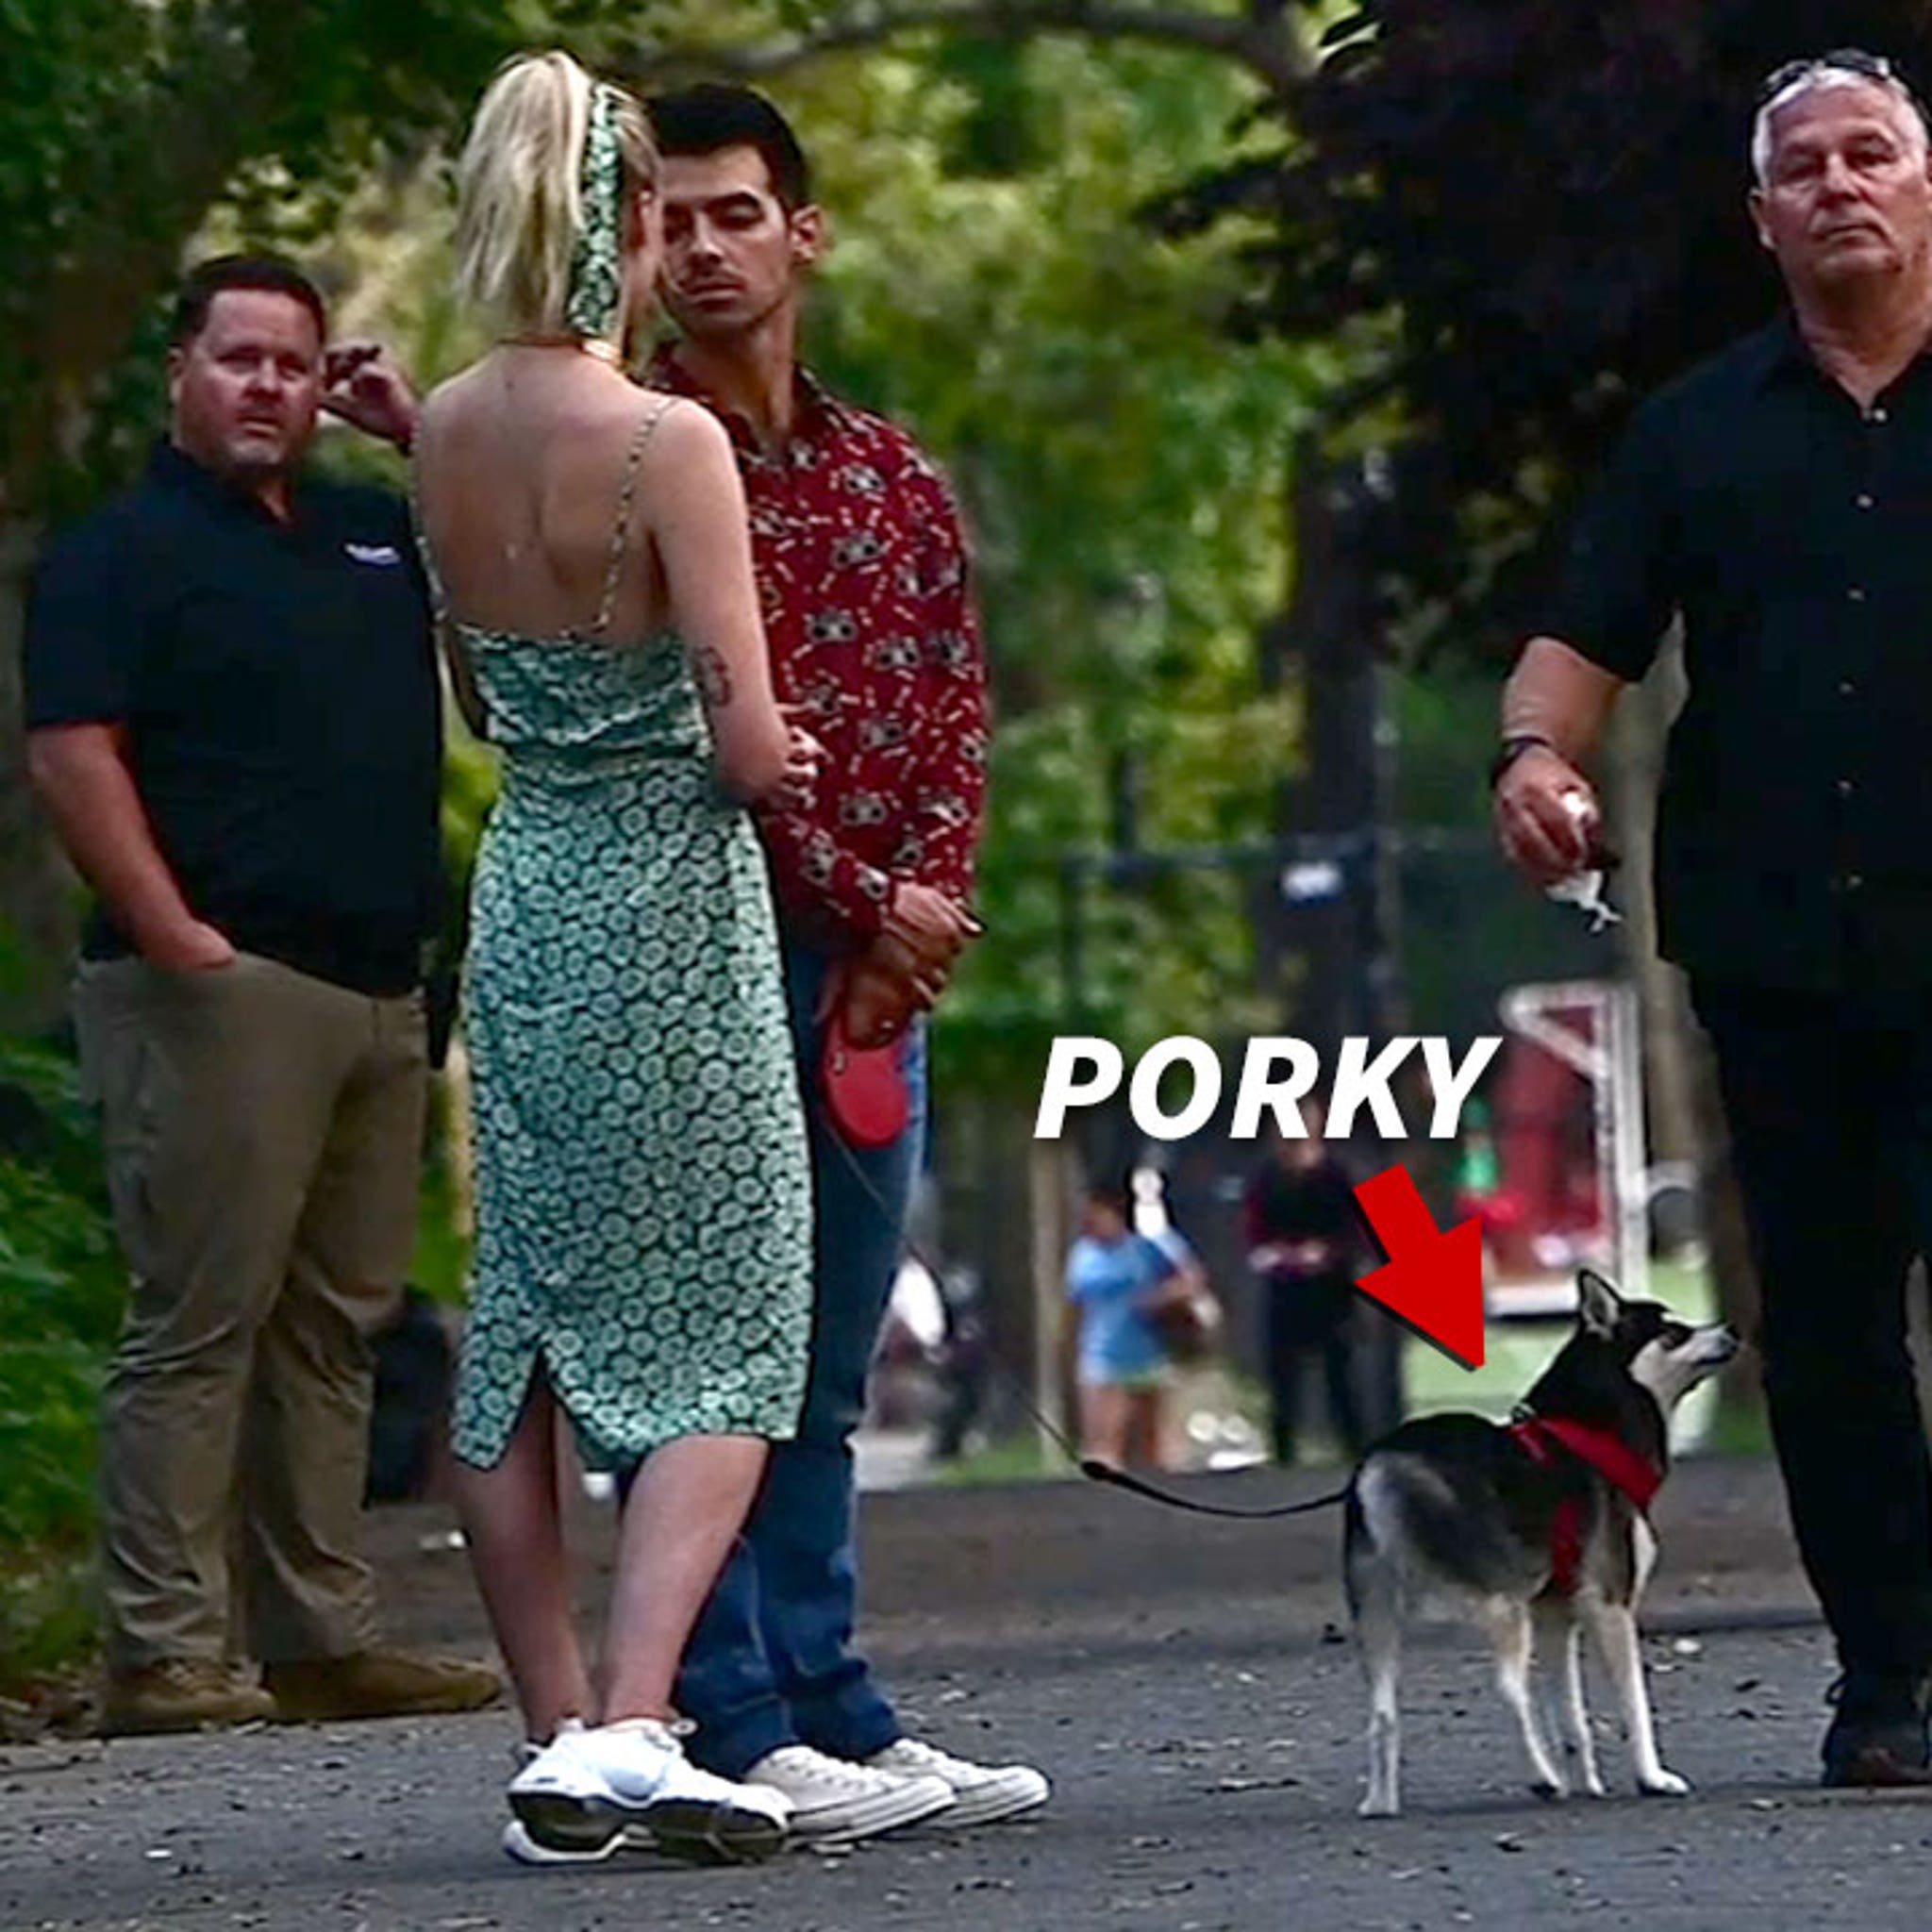 Sophie Turner and Joe Jonas' Dog Reportedly Killed in “Freak Accident”